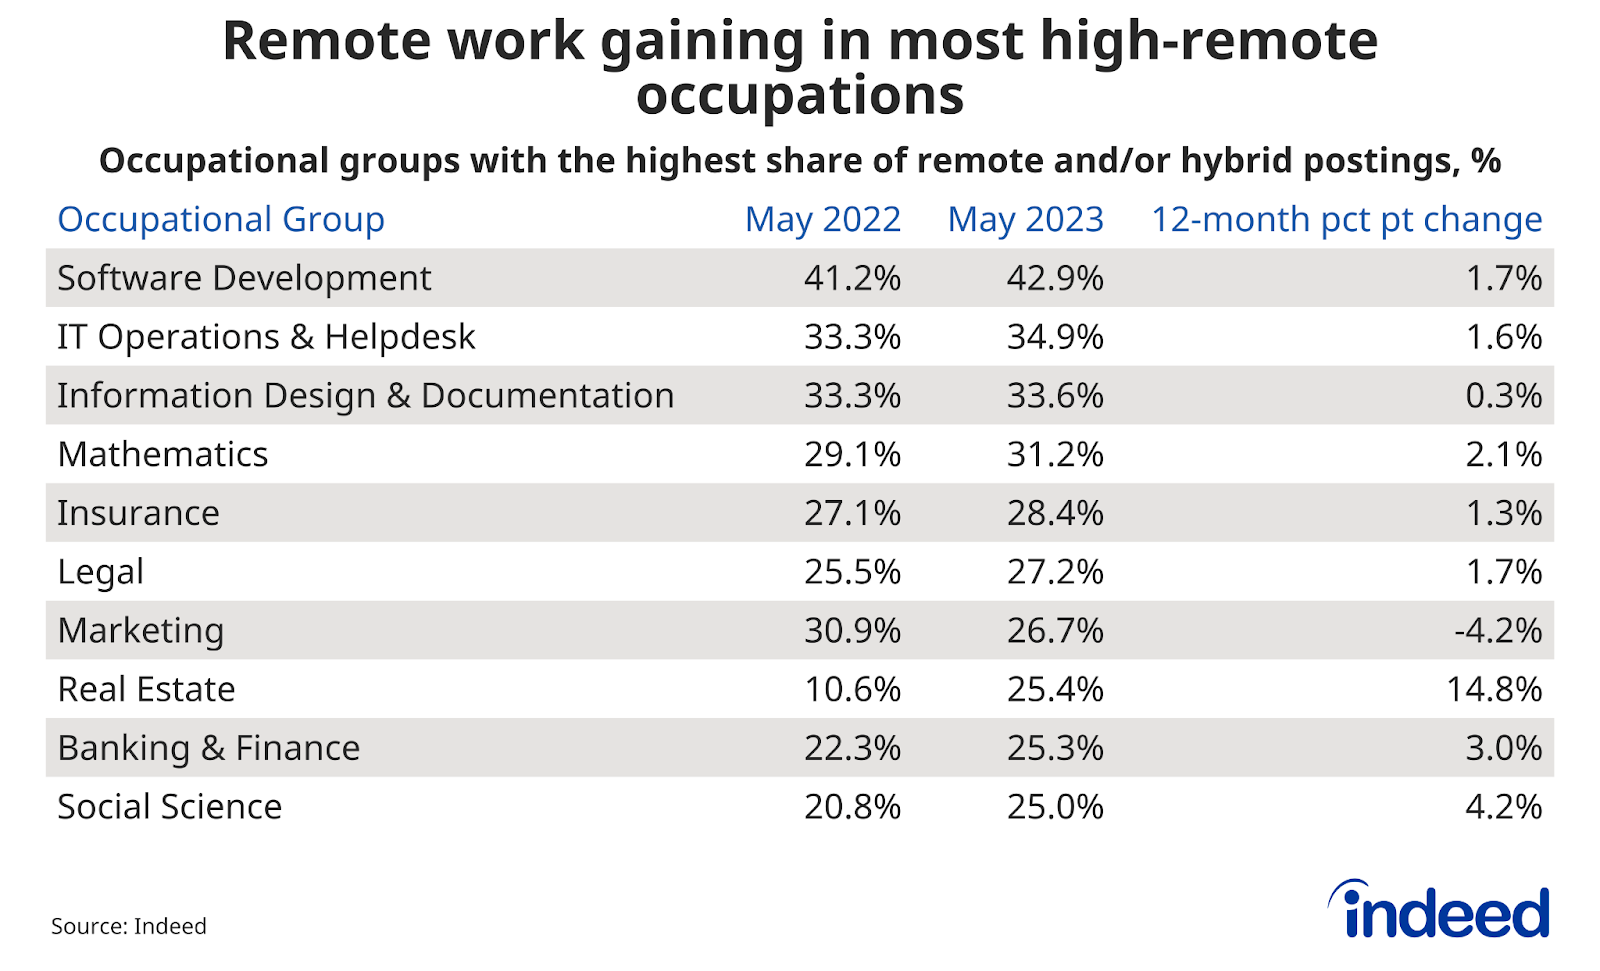 Table titled “Remote work gaining in most high-remote occupations” The share of remote postings from May 2022 and May 2023, as well as the percentage point change, is listed for those occupations with the highest share of their postings mentioning remote work.